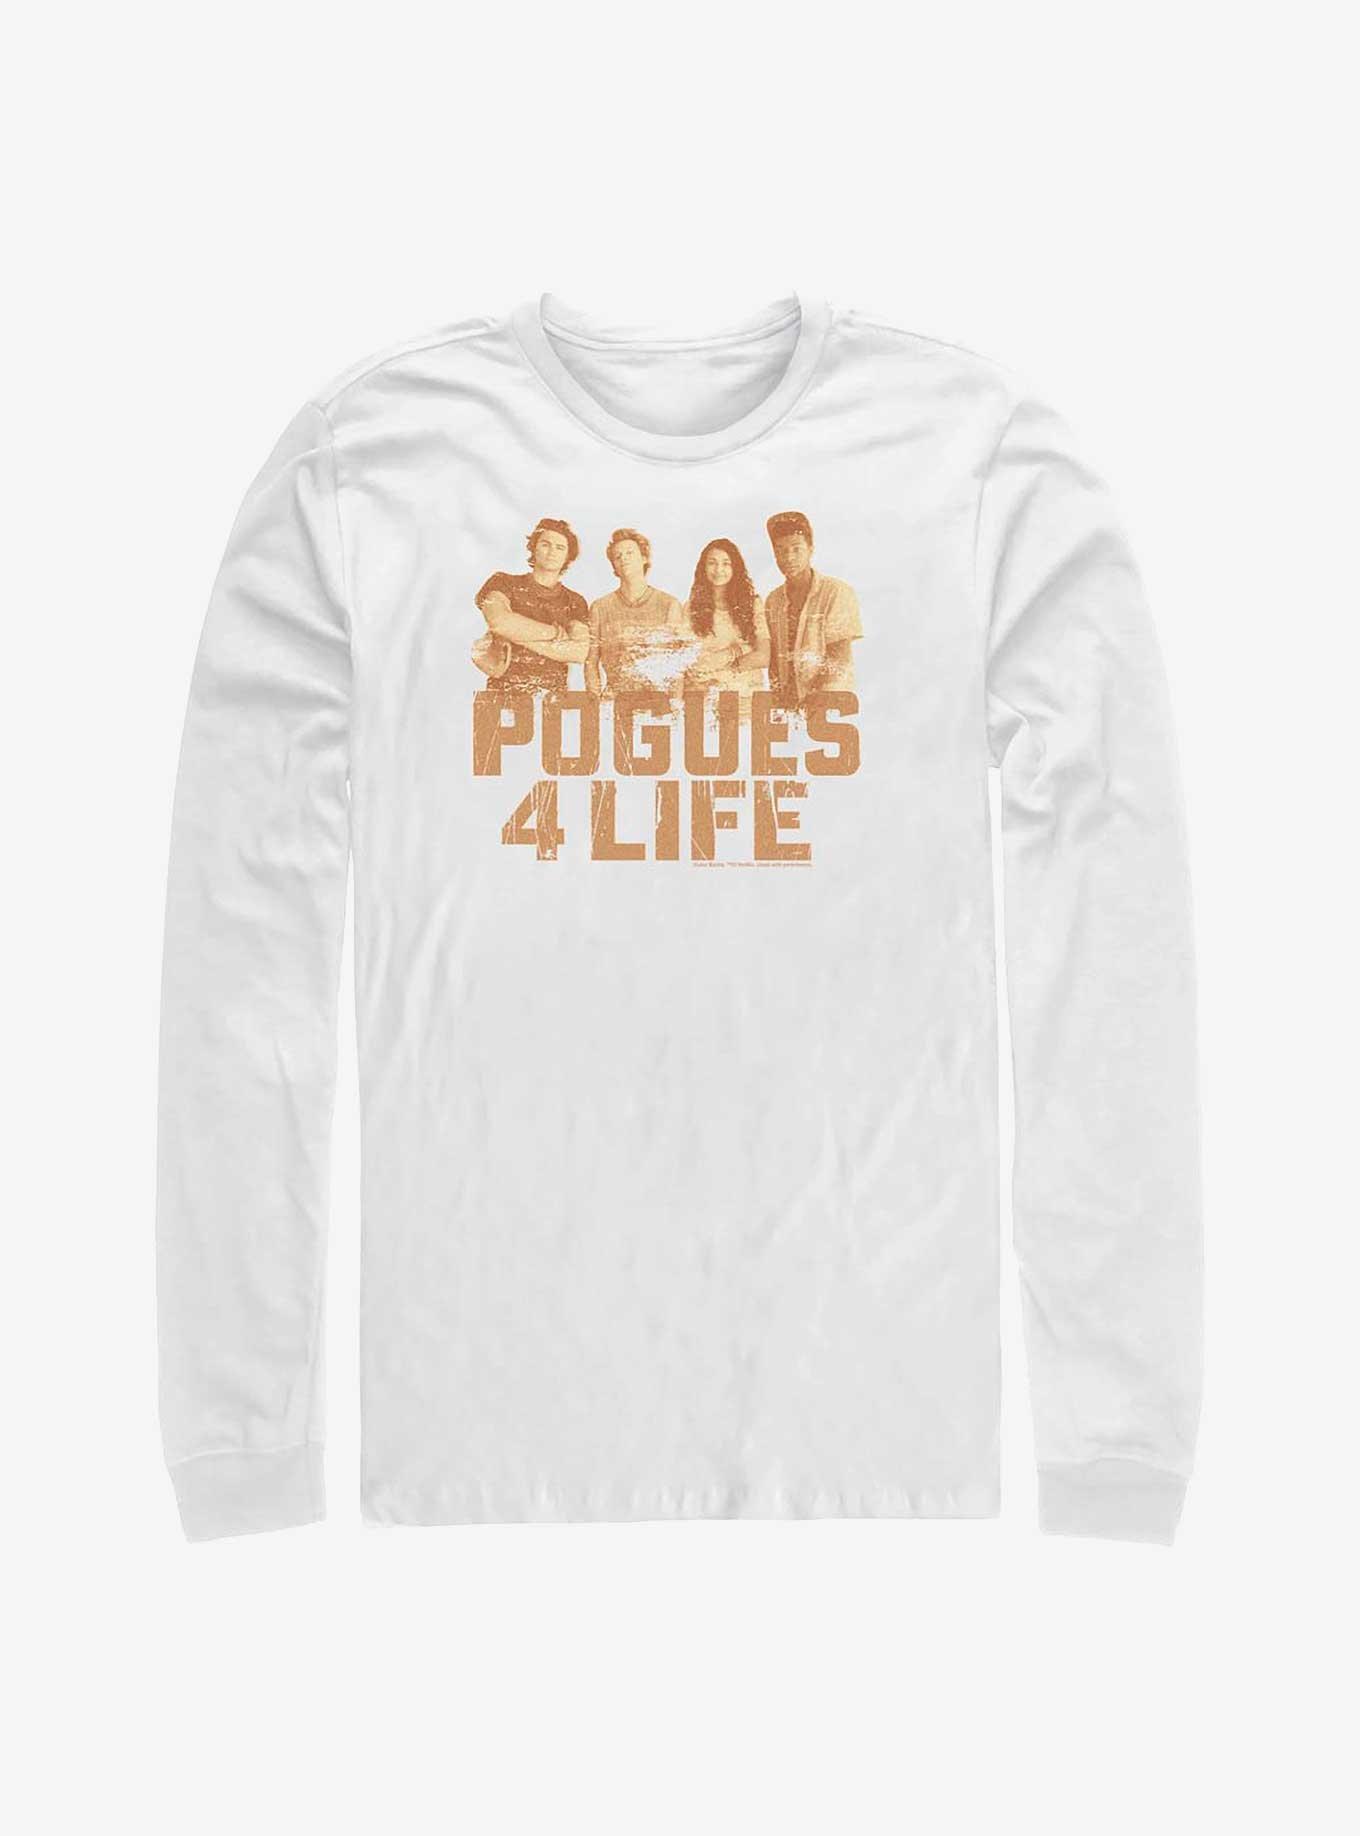 Outer Banks Pogues 4 Life Long-Sleeve T-Shirt, WHITE, hi-res